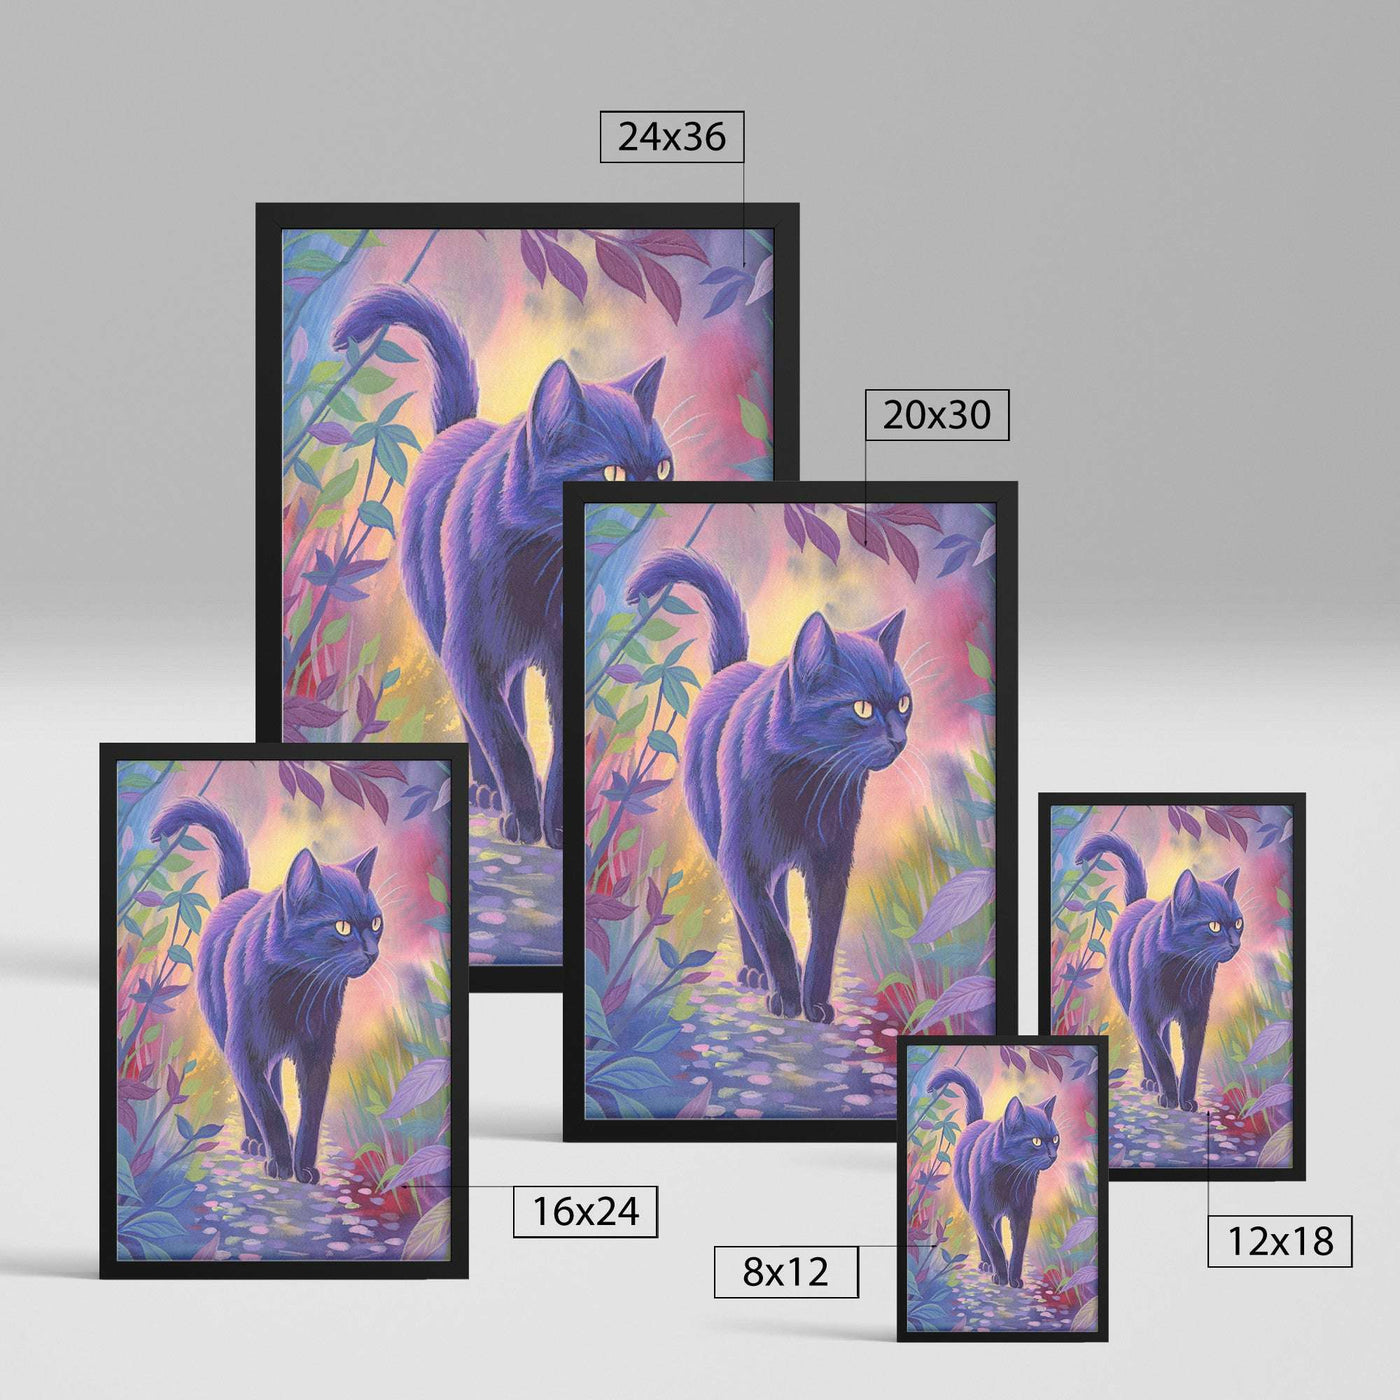 A collection of Framed Cat Art Prints in various sizes, each depicting a stylized black cat walking through a colorful forest. Sizes are labeled beside each print.